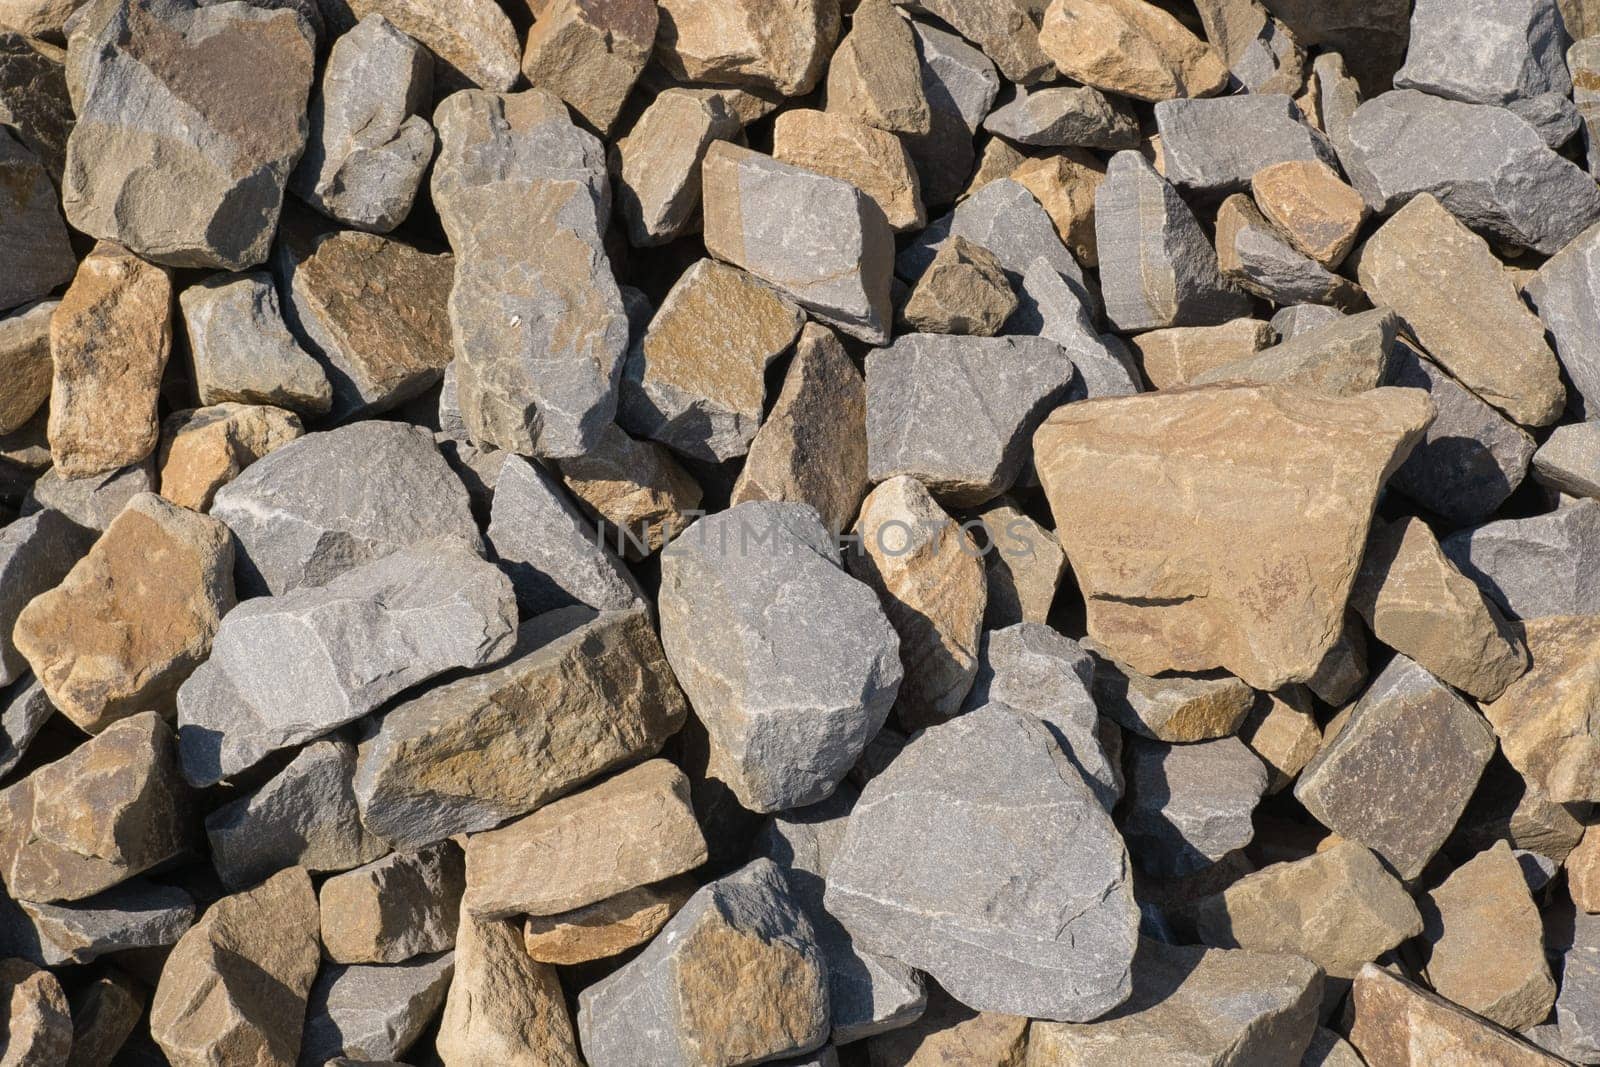 Gravel texture. Pebble stone background. Light grey closeup small rocks. Top view of ground gravel road